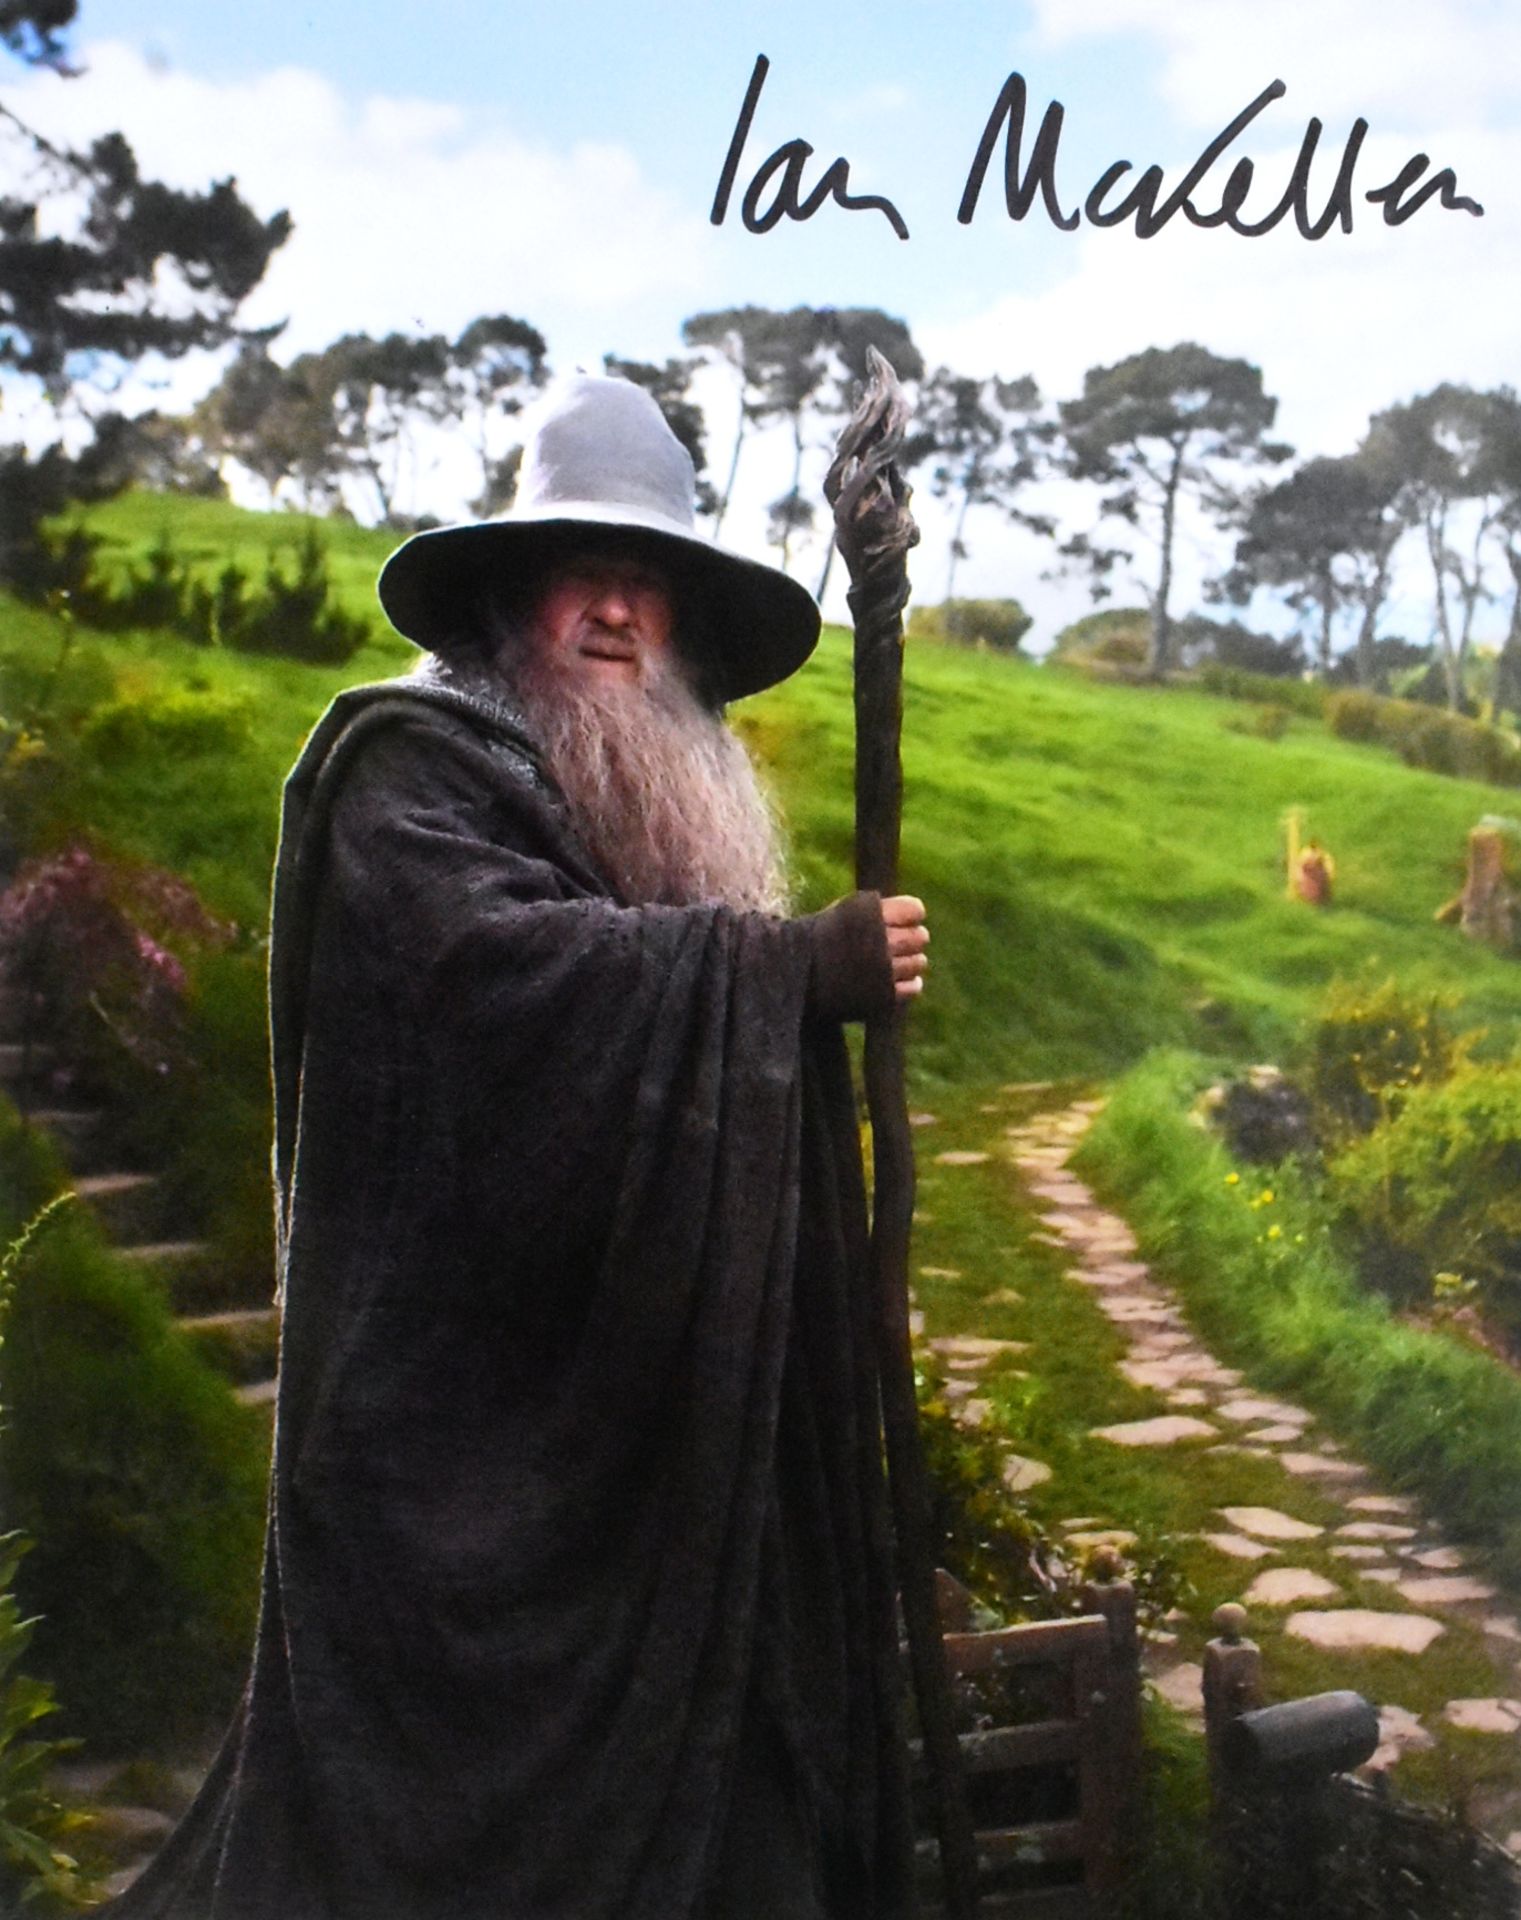 SIR IAN MCKELLEN - LORD OF THE RINGS - SIGNED 8X10" PHOTO - AFTAL